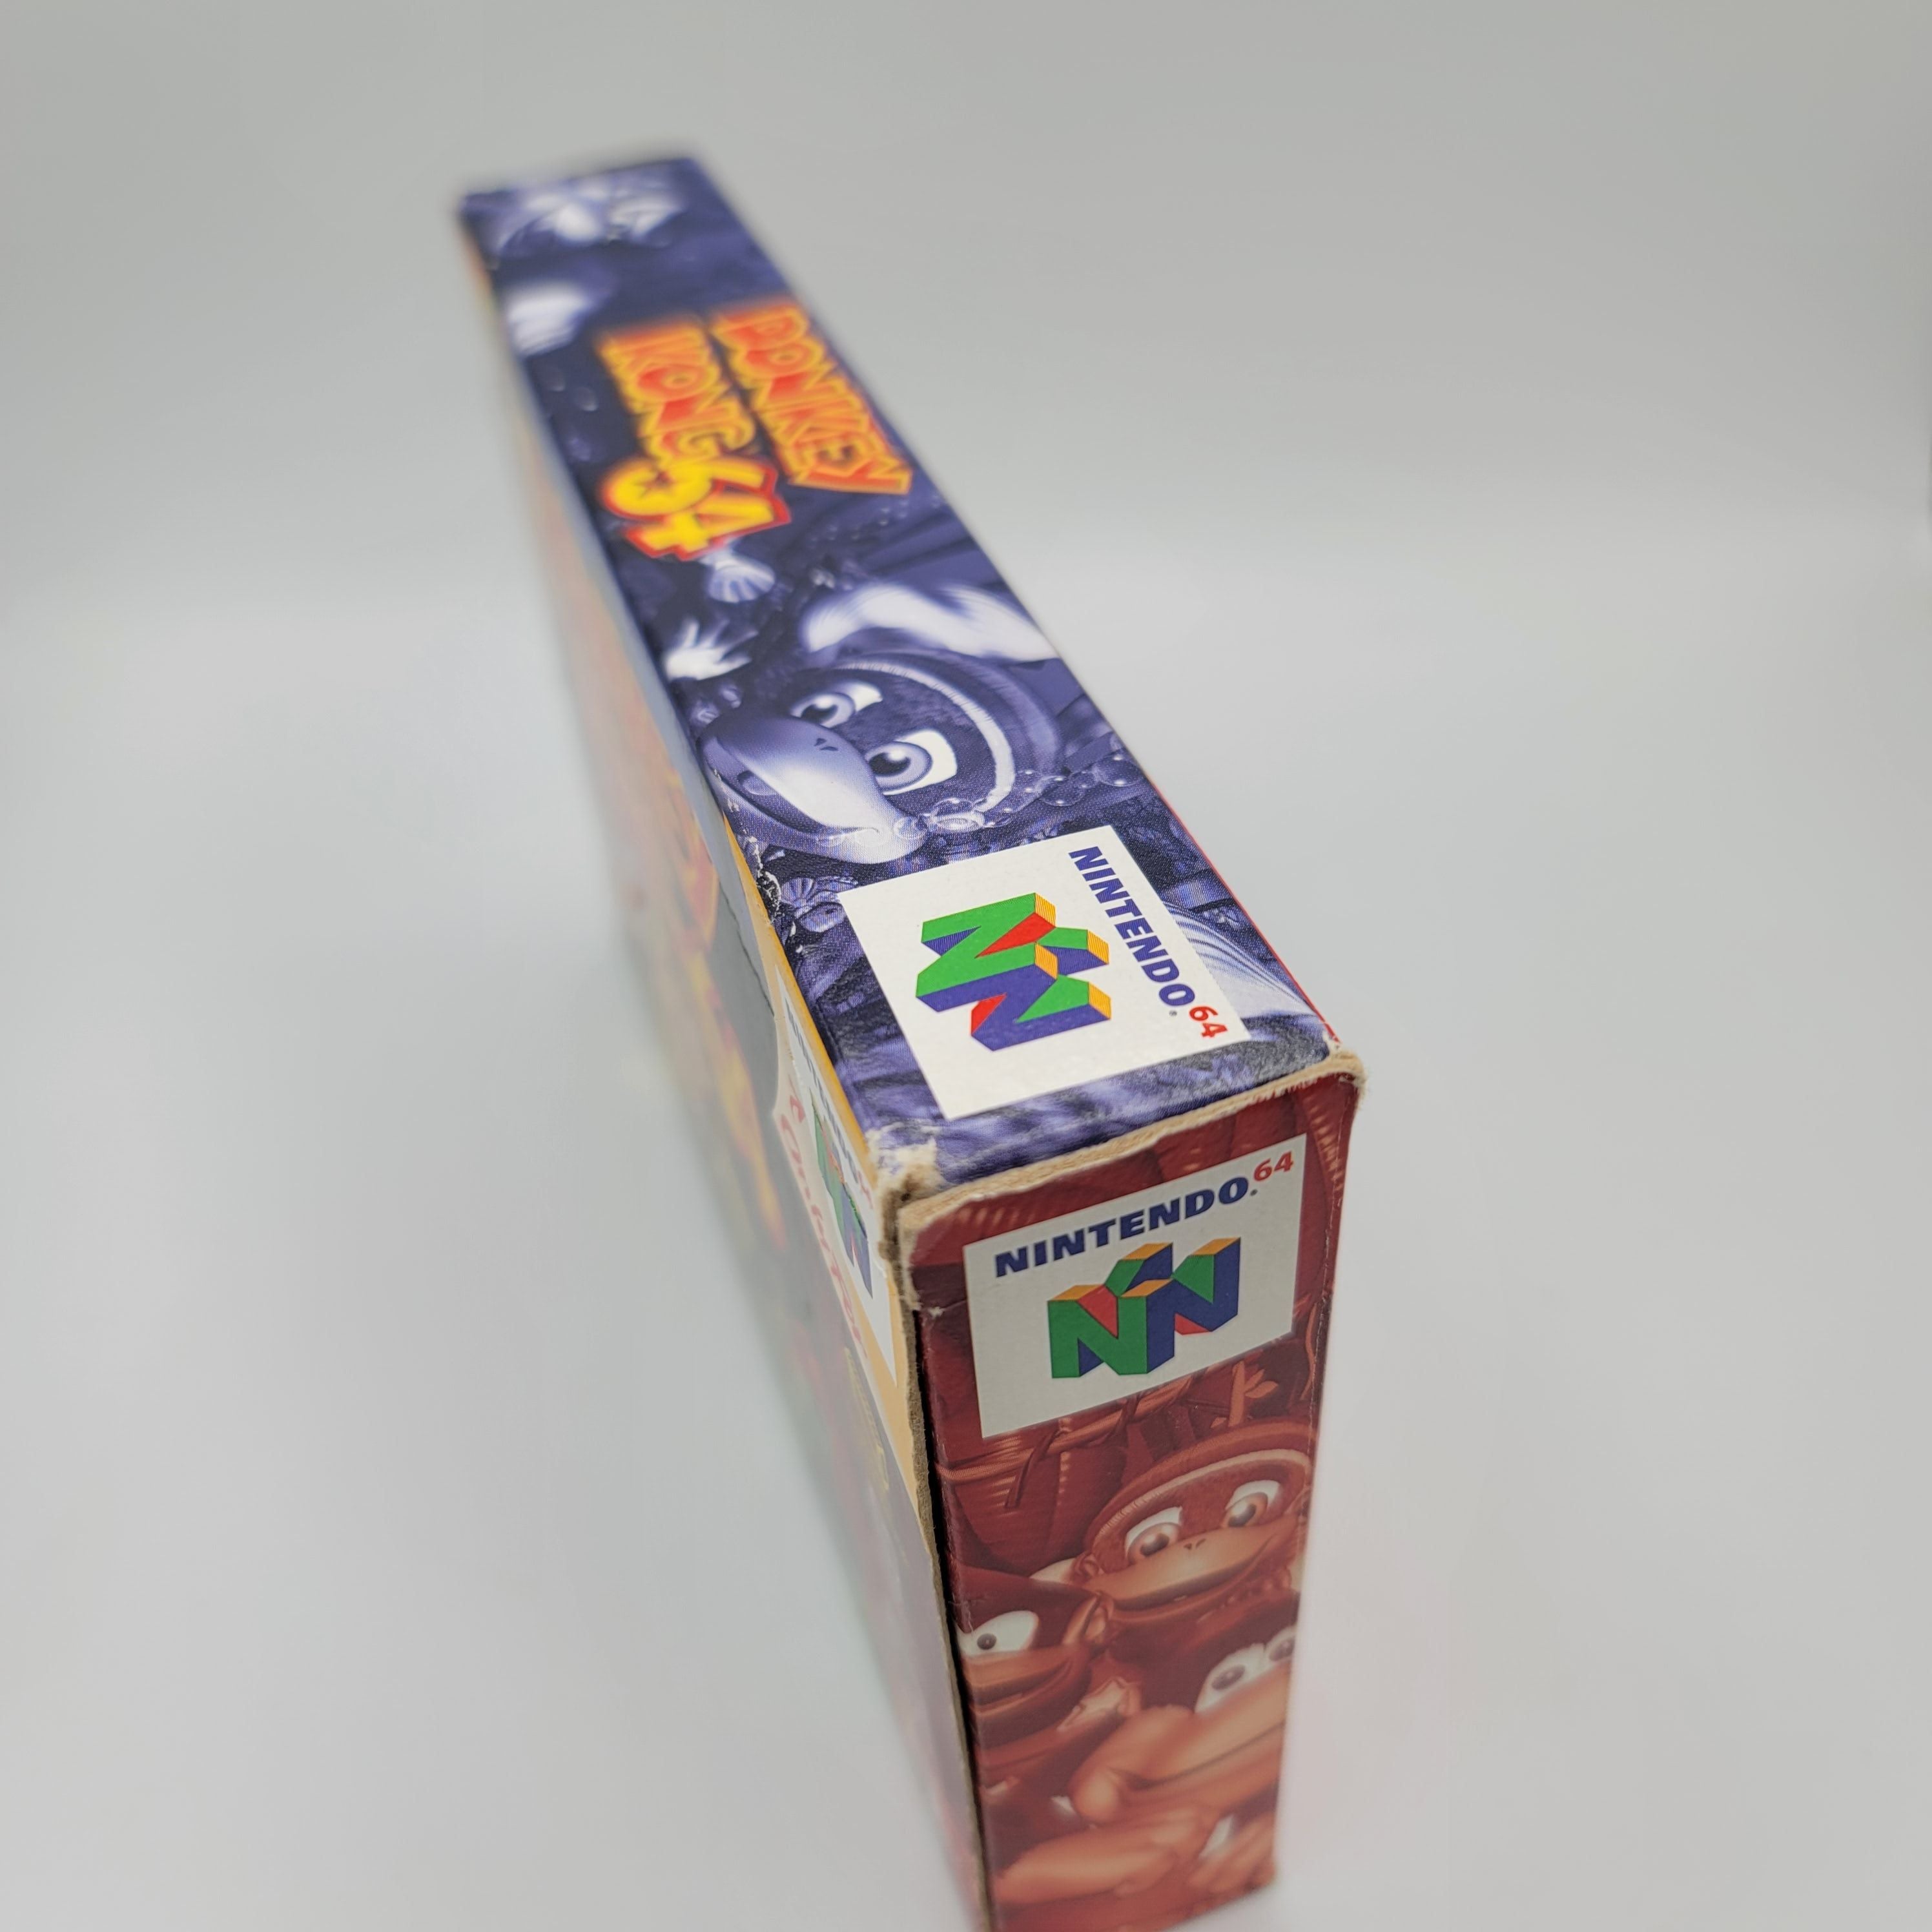 N64 - Donkey Kong 64 (Complete in Box / A- / With Manual)